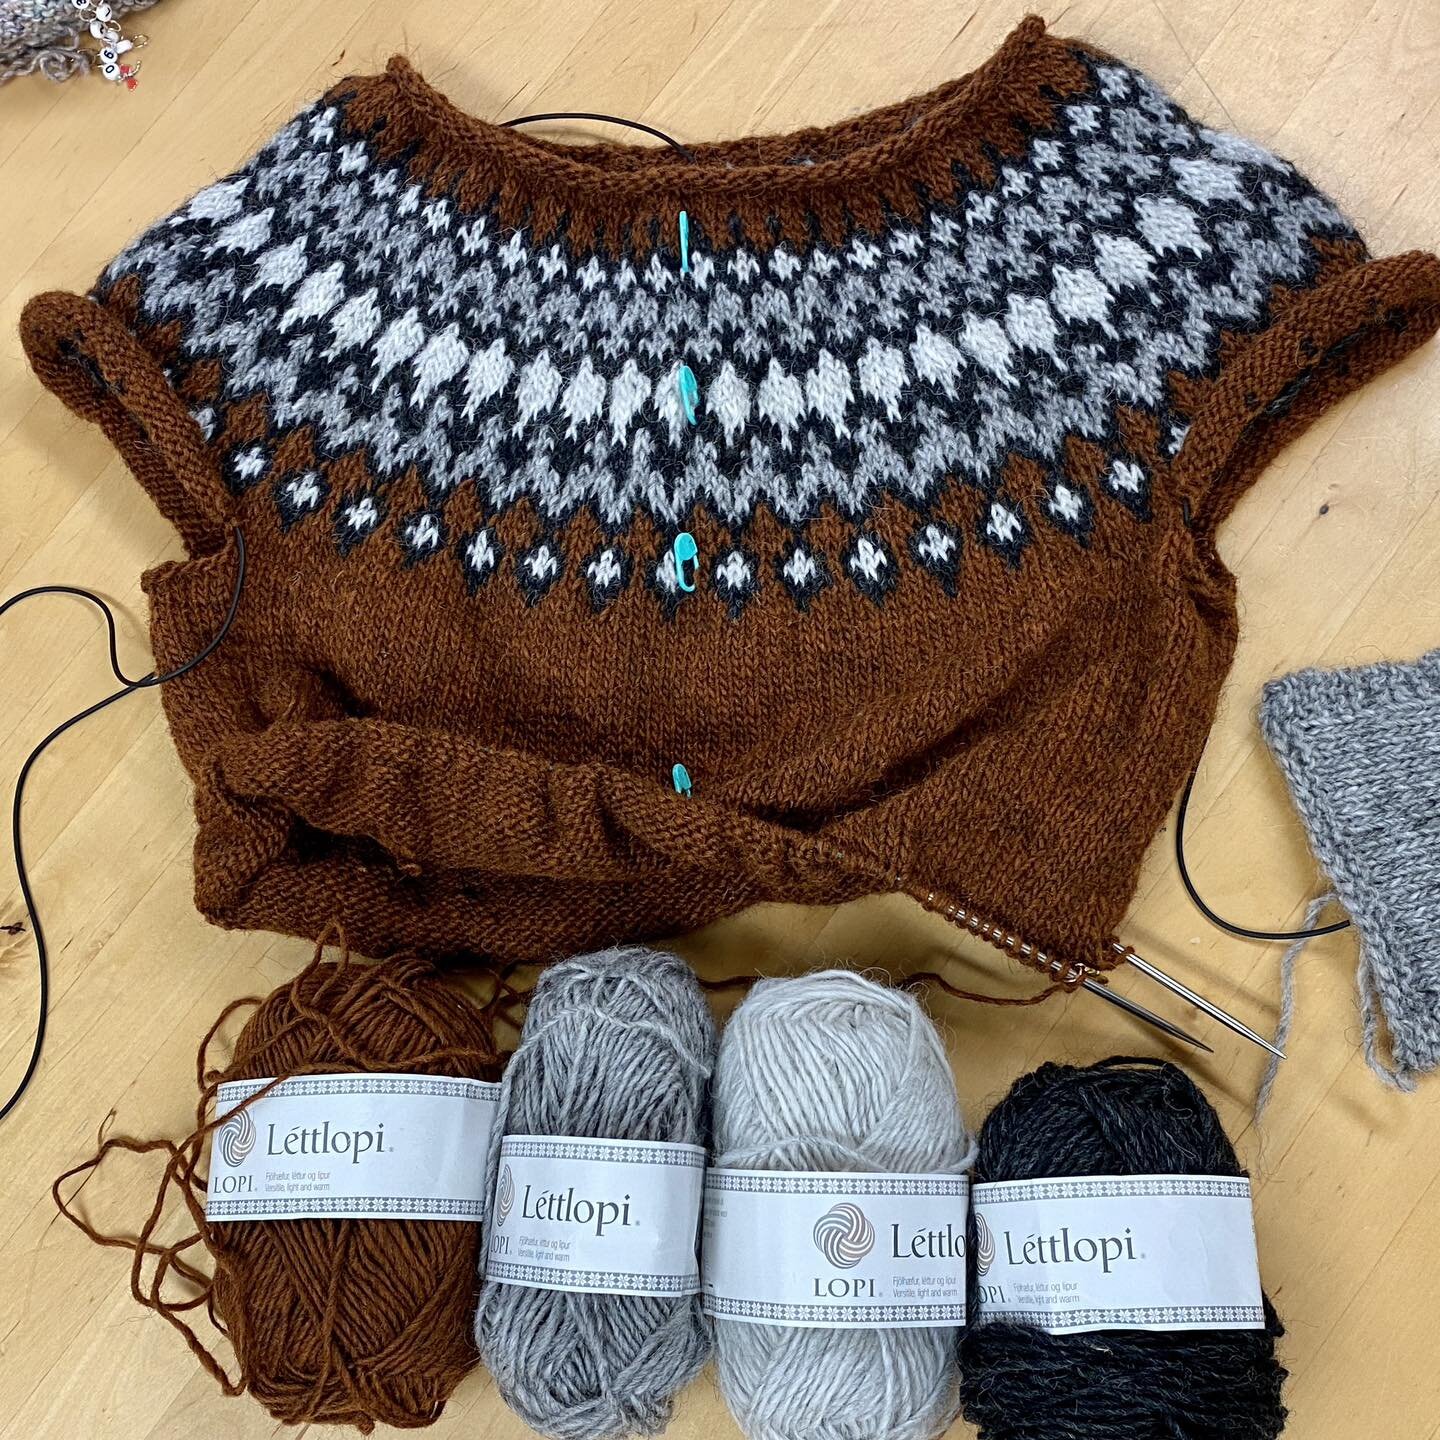 There are always a lot of WIPs floating around the shop! Here are two we are loving right now. Miechelle&rsquo;s Treysta by Jenn Steingass is working up sooo quickly in Aran weight Lettlopi. And Brooke is using Madara by Noro for a wear-with-everythi